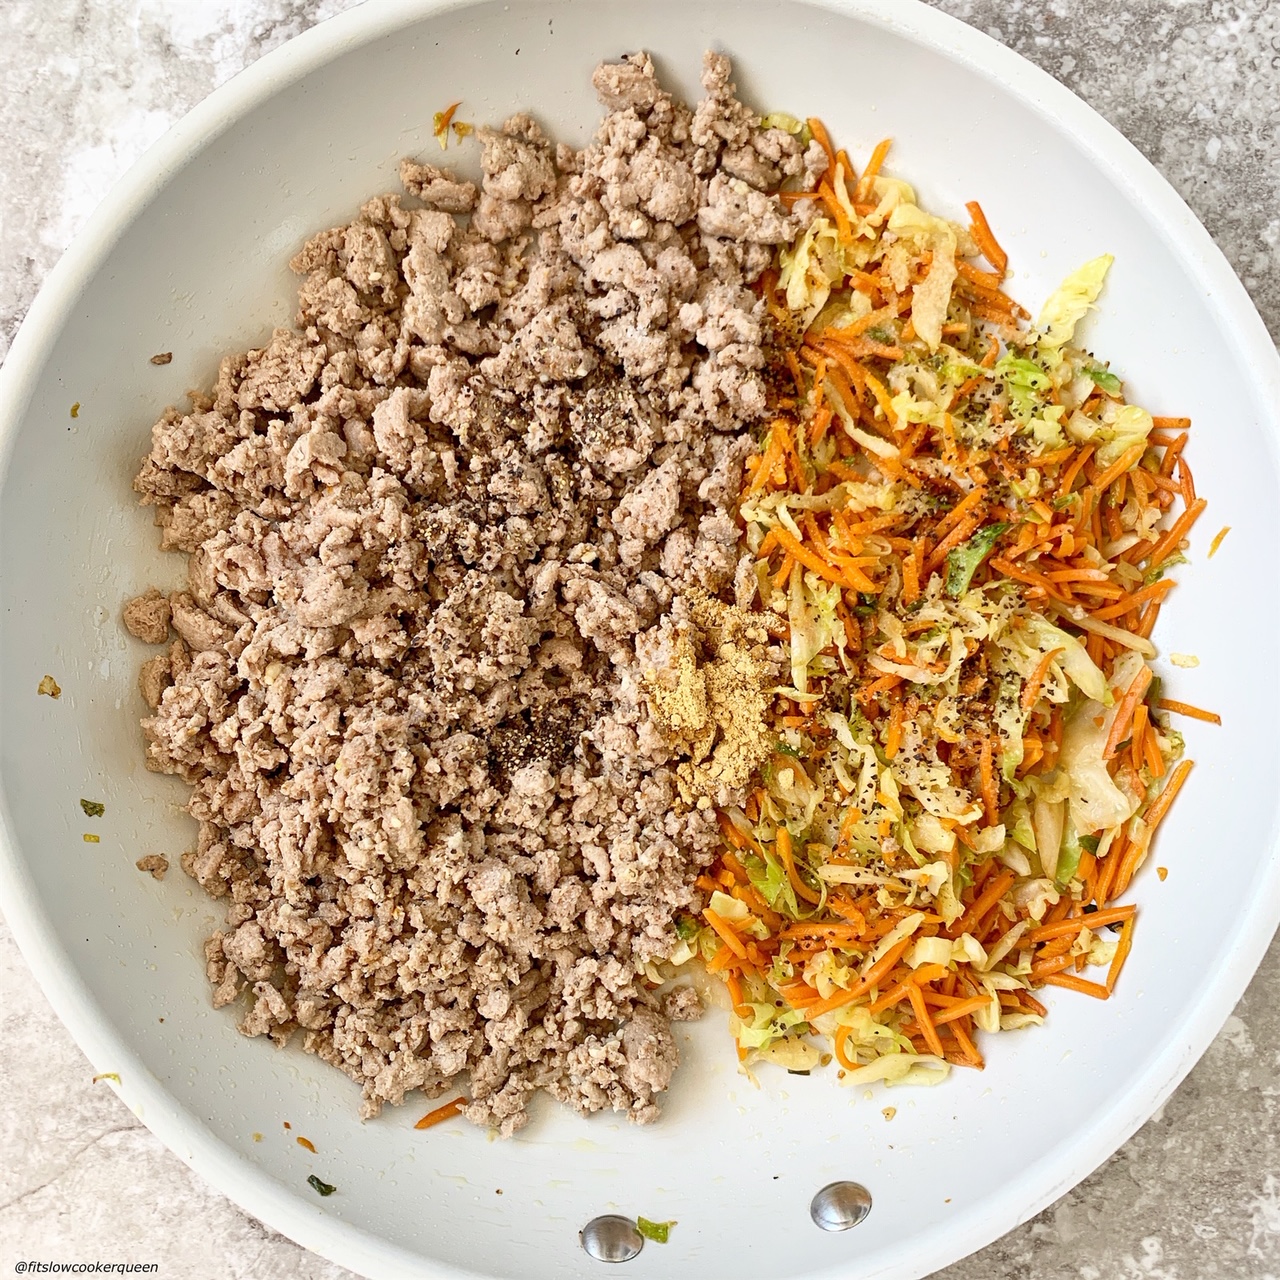 ground meat, cabbage, and carrots in a skillet with seasonings